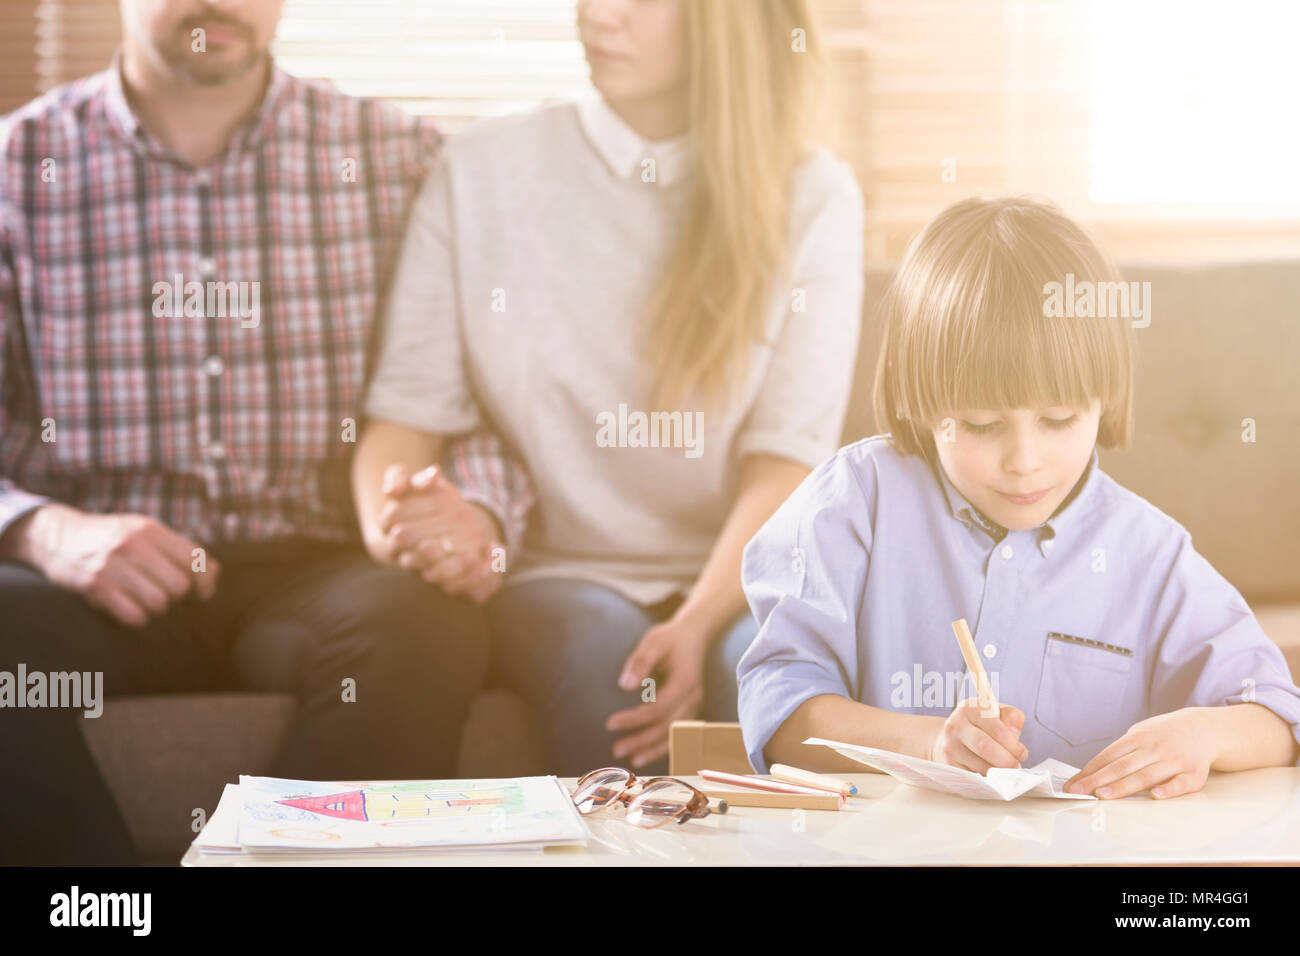 Man and woman holding hands on a couch and a boy in front drawing pictures by a table during a family psychotherapy session. Front view. Flare. Blurre Stock Photo